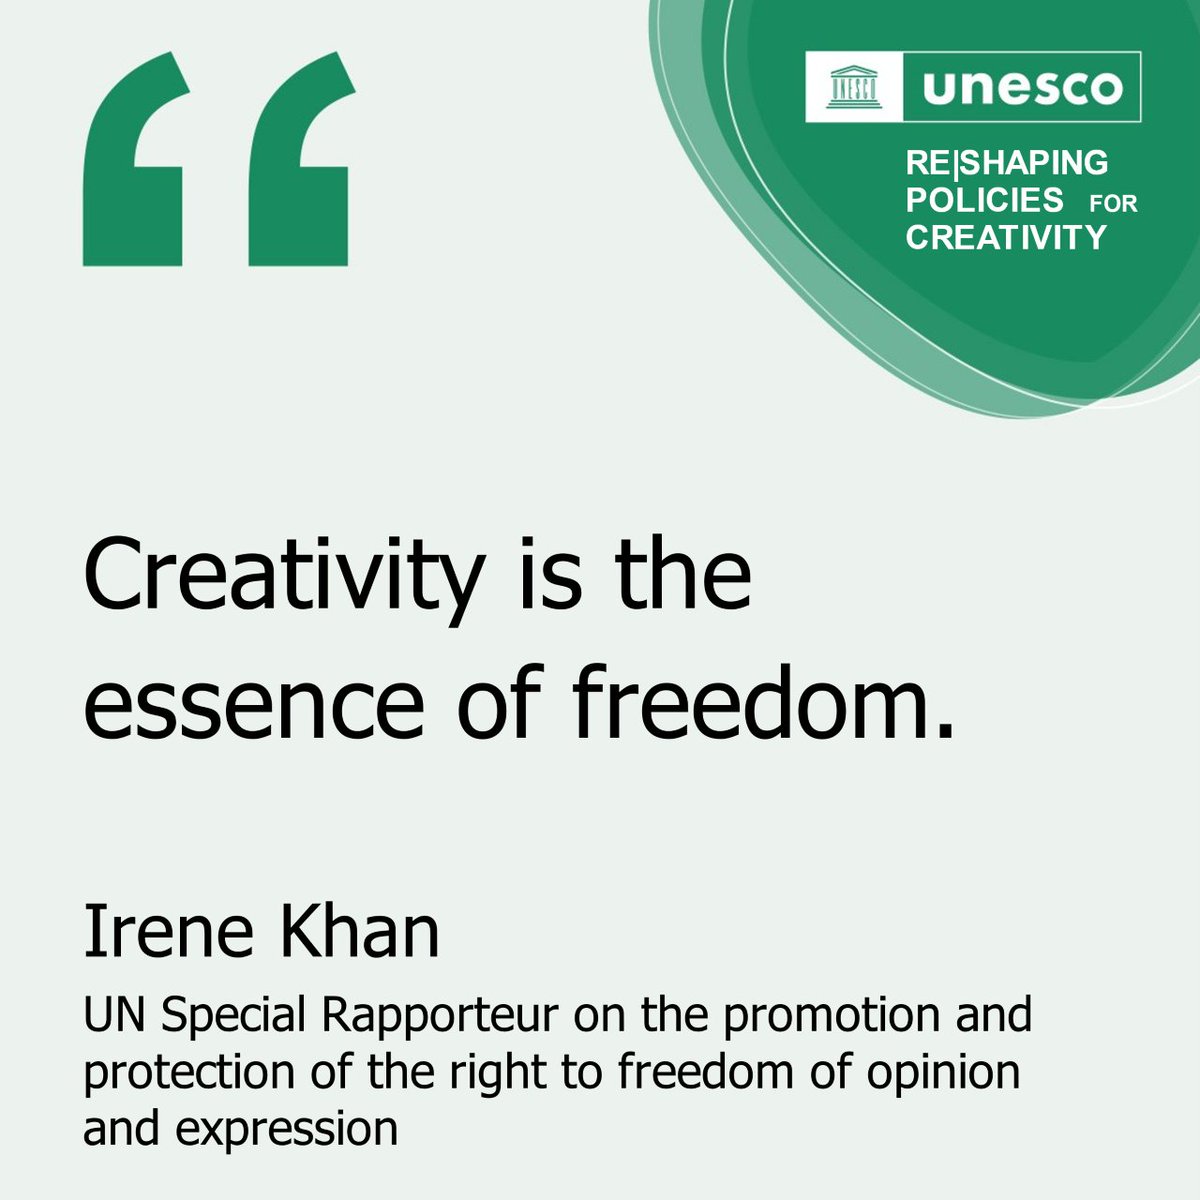 Imagine a world without actors, musicians, or painters. A world without the freedom to create.

Ahead of #WorldArtDay, celebrate the creators around you.

More on how to #SupportCreativity from UNESCO's Global Report ‘Re|Shaping Policies for Creativity’: on.unesco.org/3sFZWJl